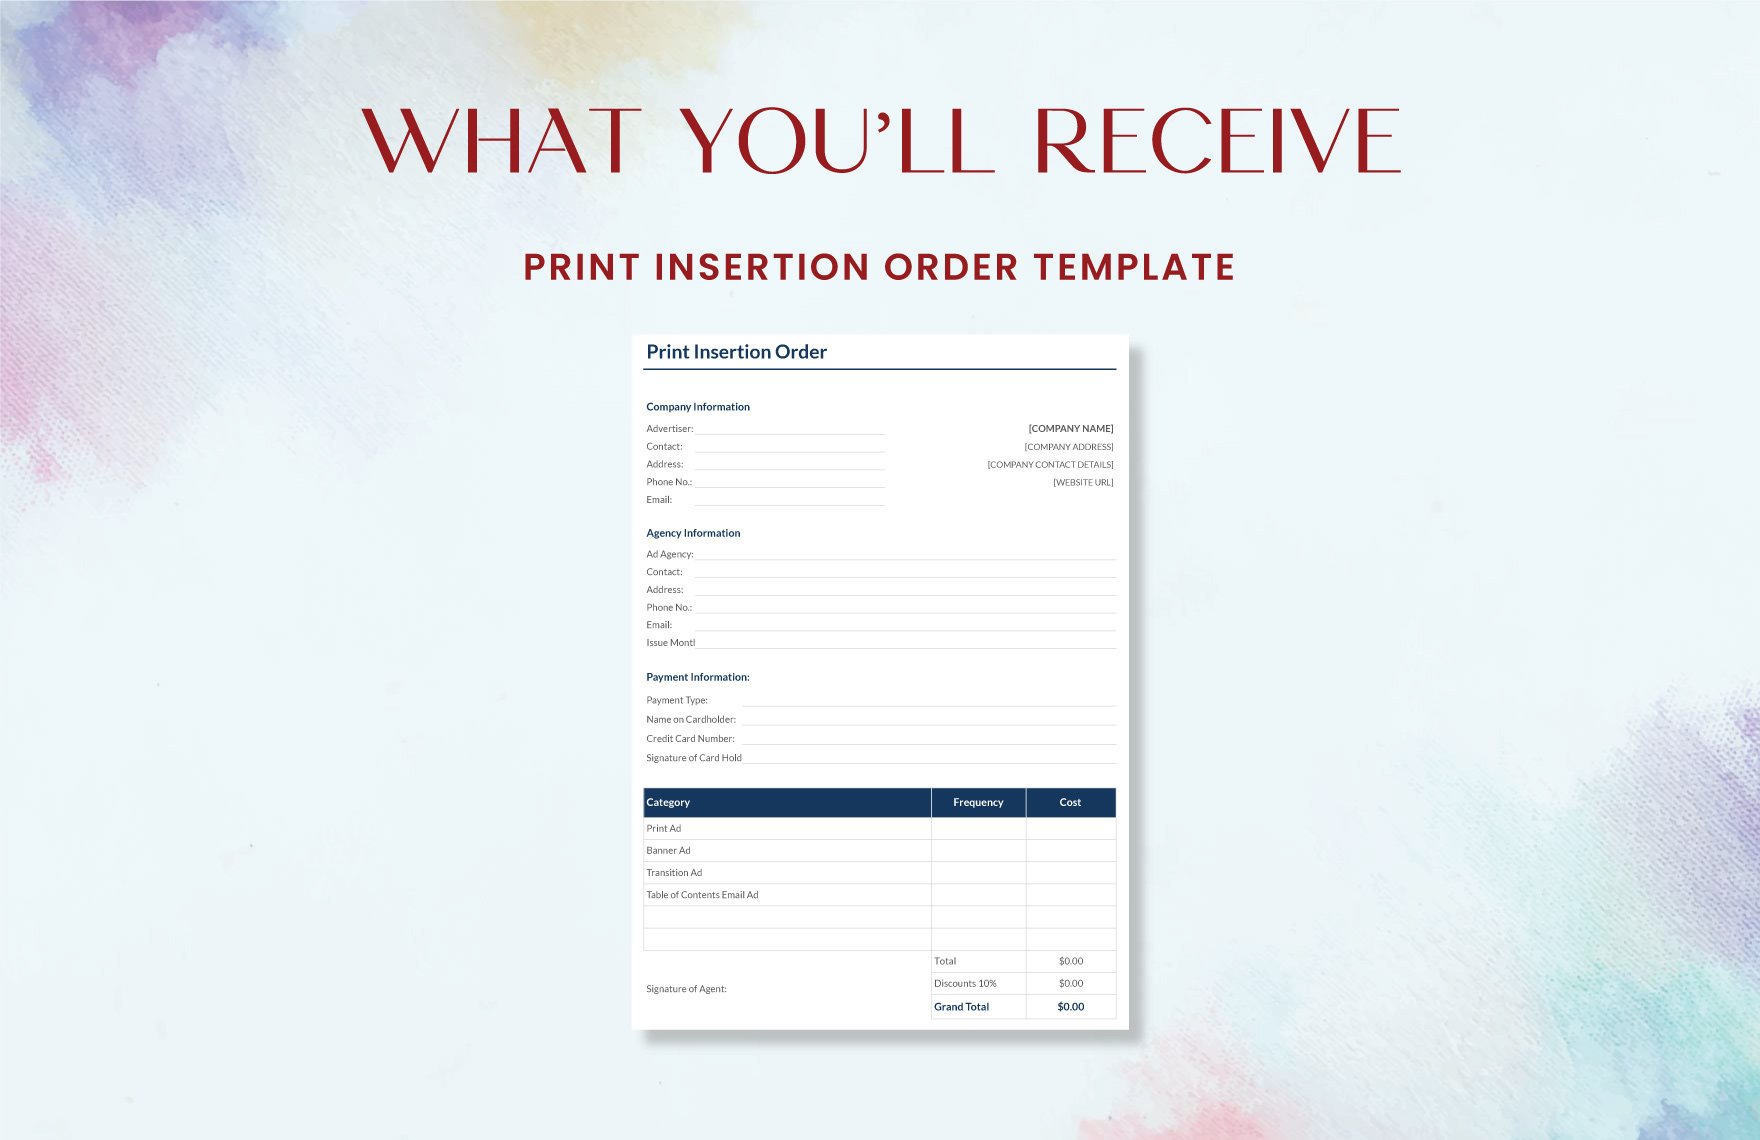 Print Insertion Order Template